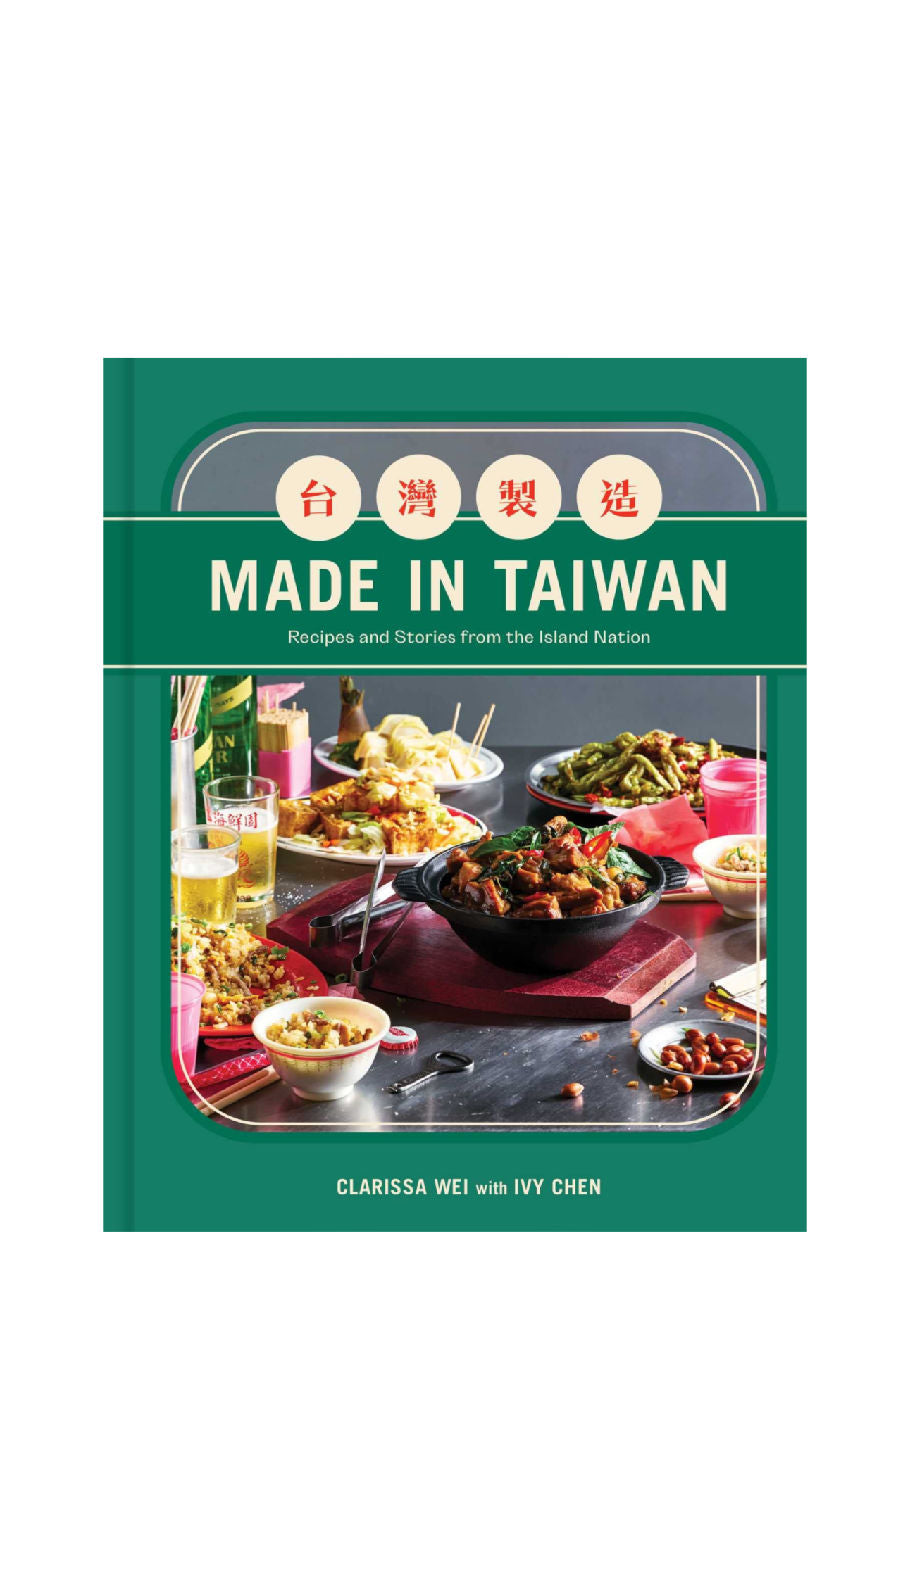 Made in Taiwan: Recipes and Stories from the Island Nation / CLARISSA WEI - COMING SEPT. 19TH